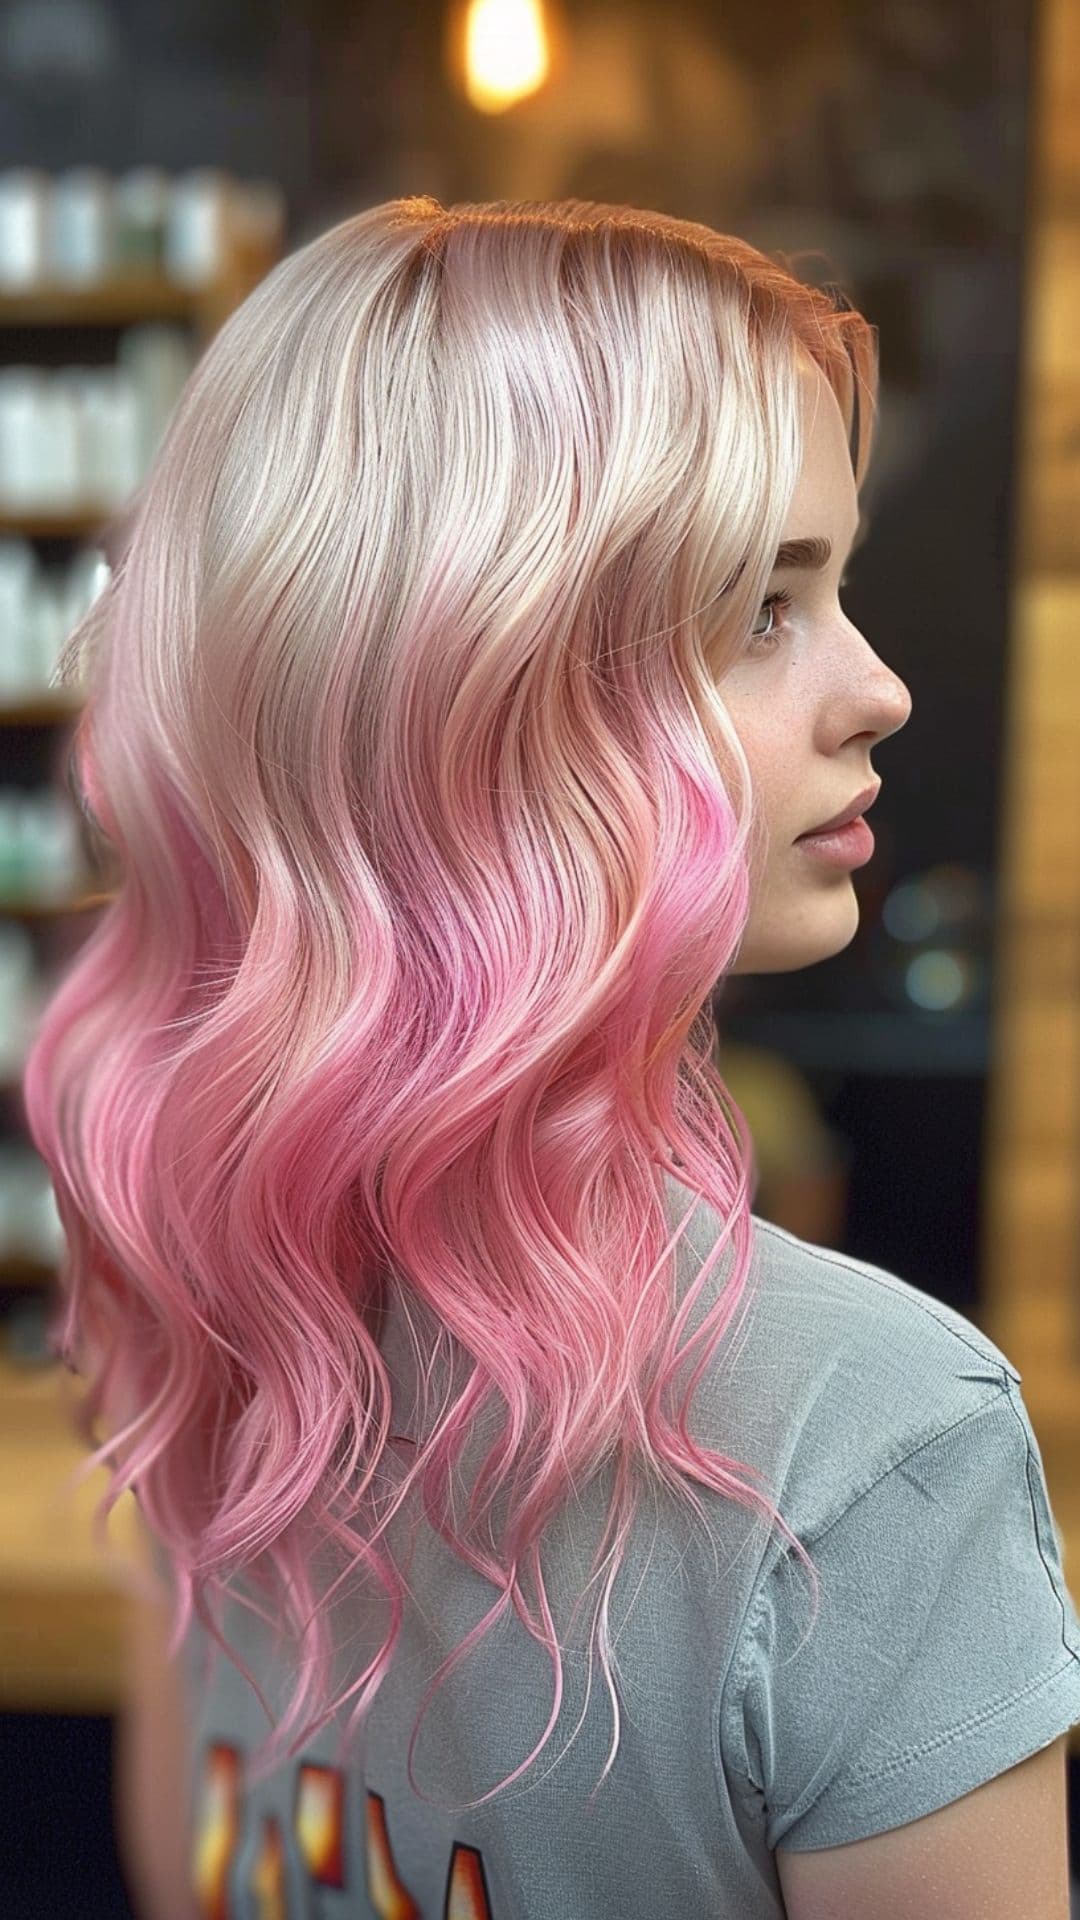 A woman modelling a pastel pink ombre hair.